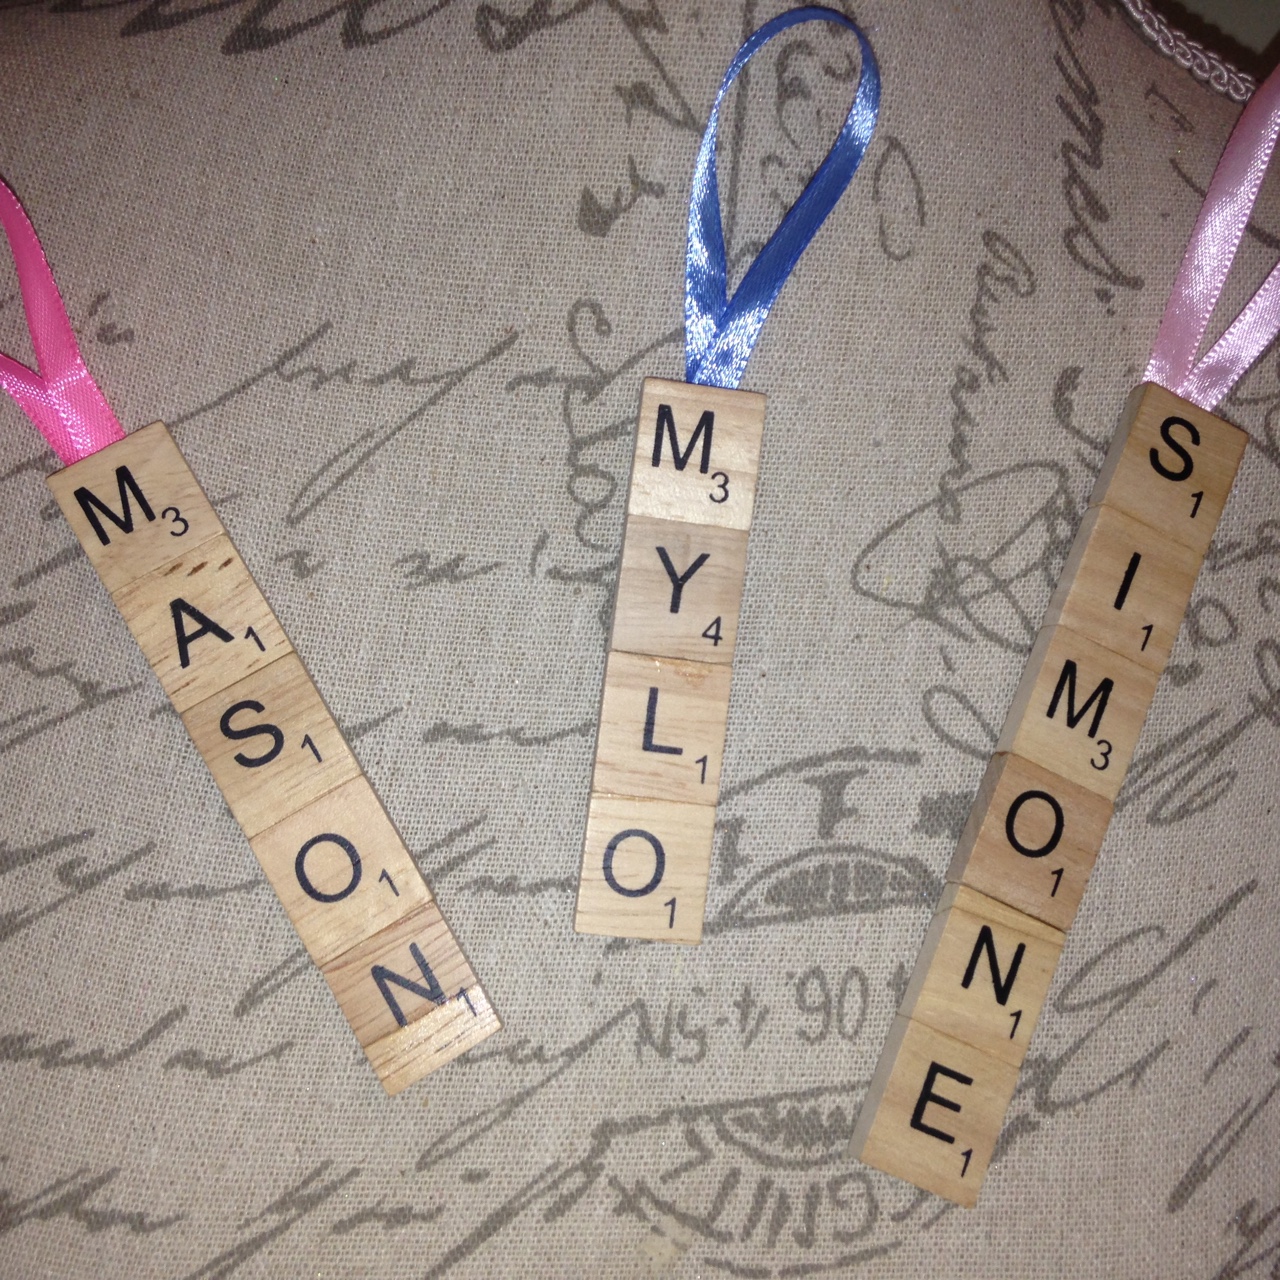 scrabble tiles spell names and are attached to keyrings